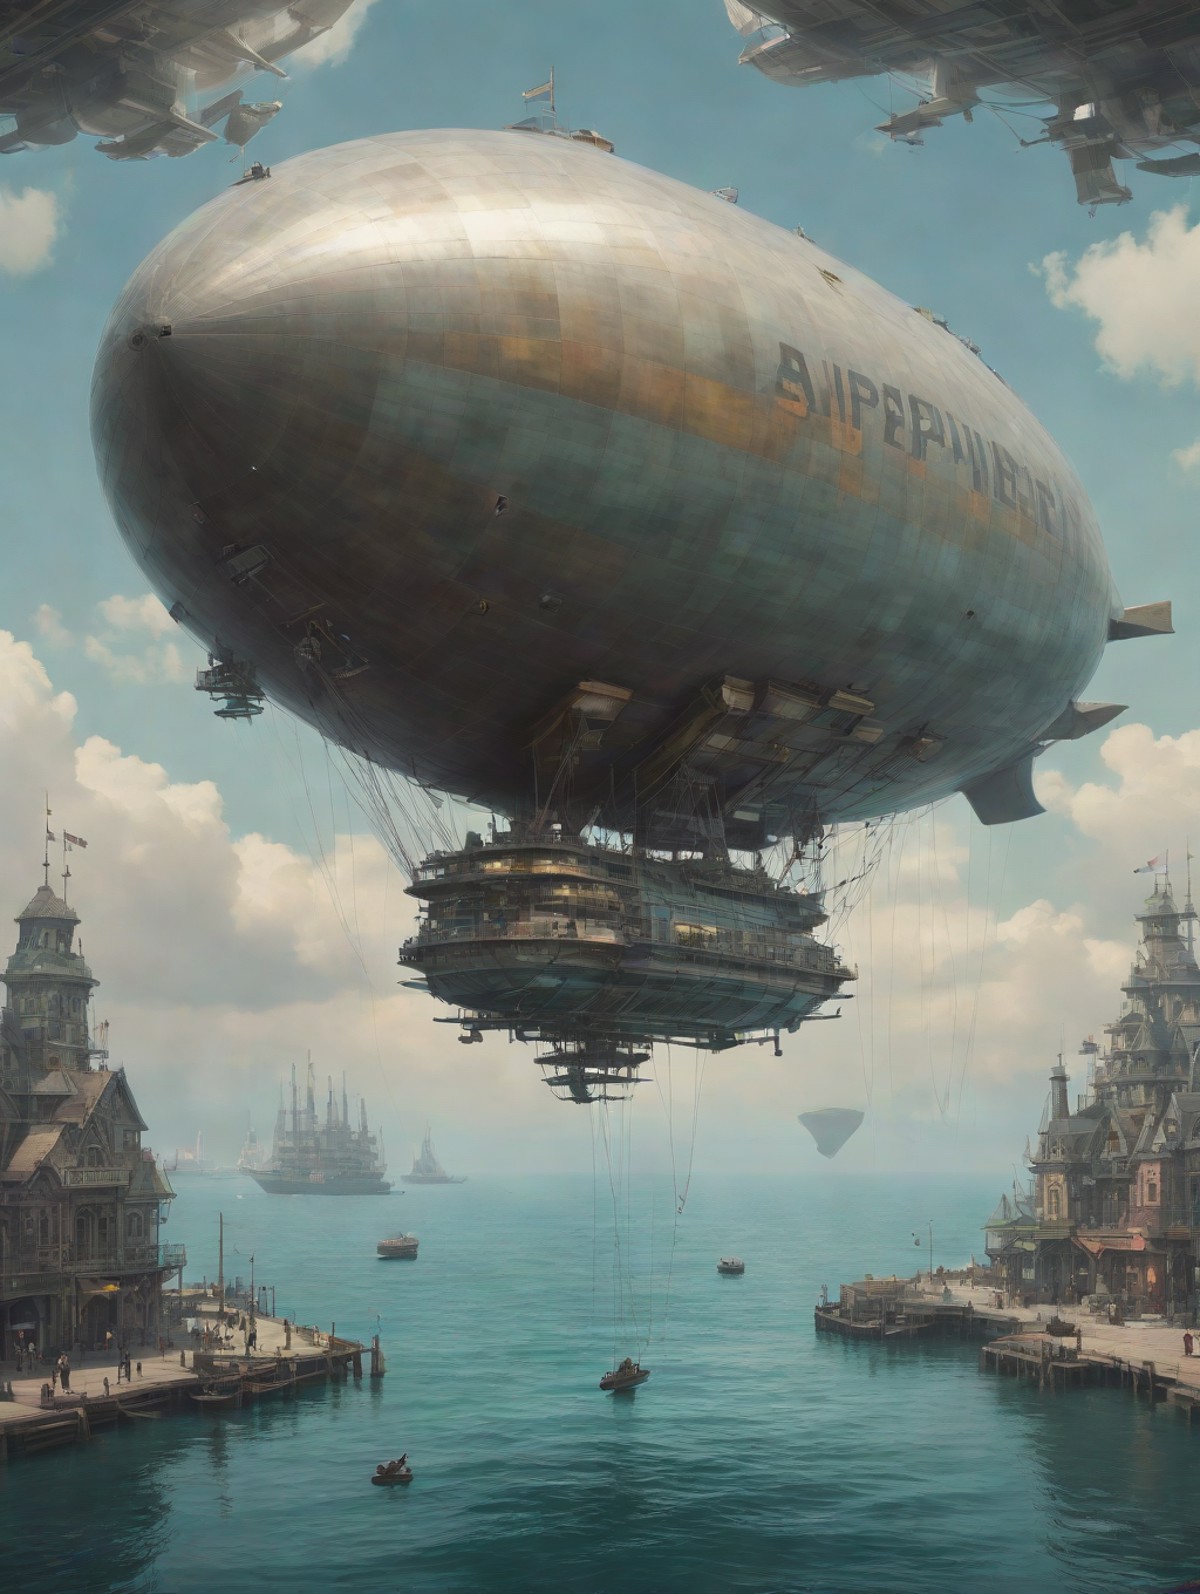 (aesthetic: victorian_cyberpunk) (subject: airship) (material: diamond sheets) (action: approaching) (location: engineered...